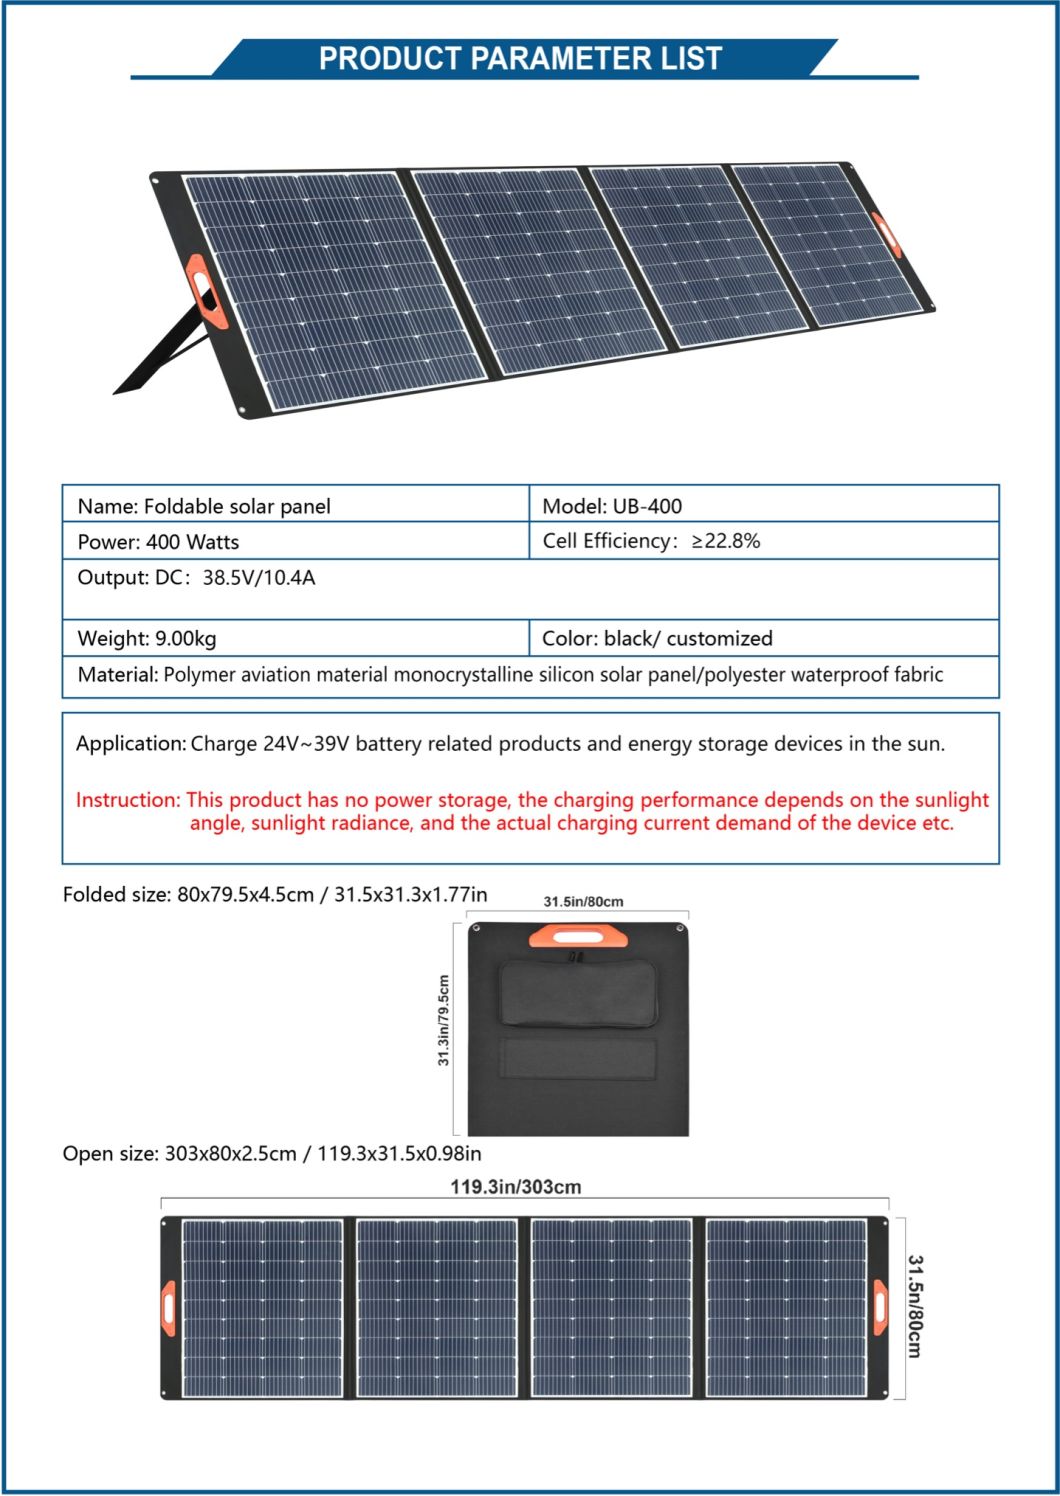 Specializing in The Production of Portable Mobile 60 W / 100 W / 120 W / 200 W / 300 W / 400 W Flexible, Efficient, Waterproof Design, Monocrystalline Silicon F